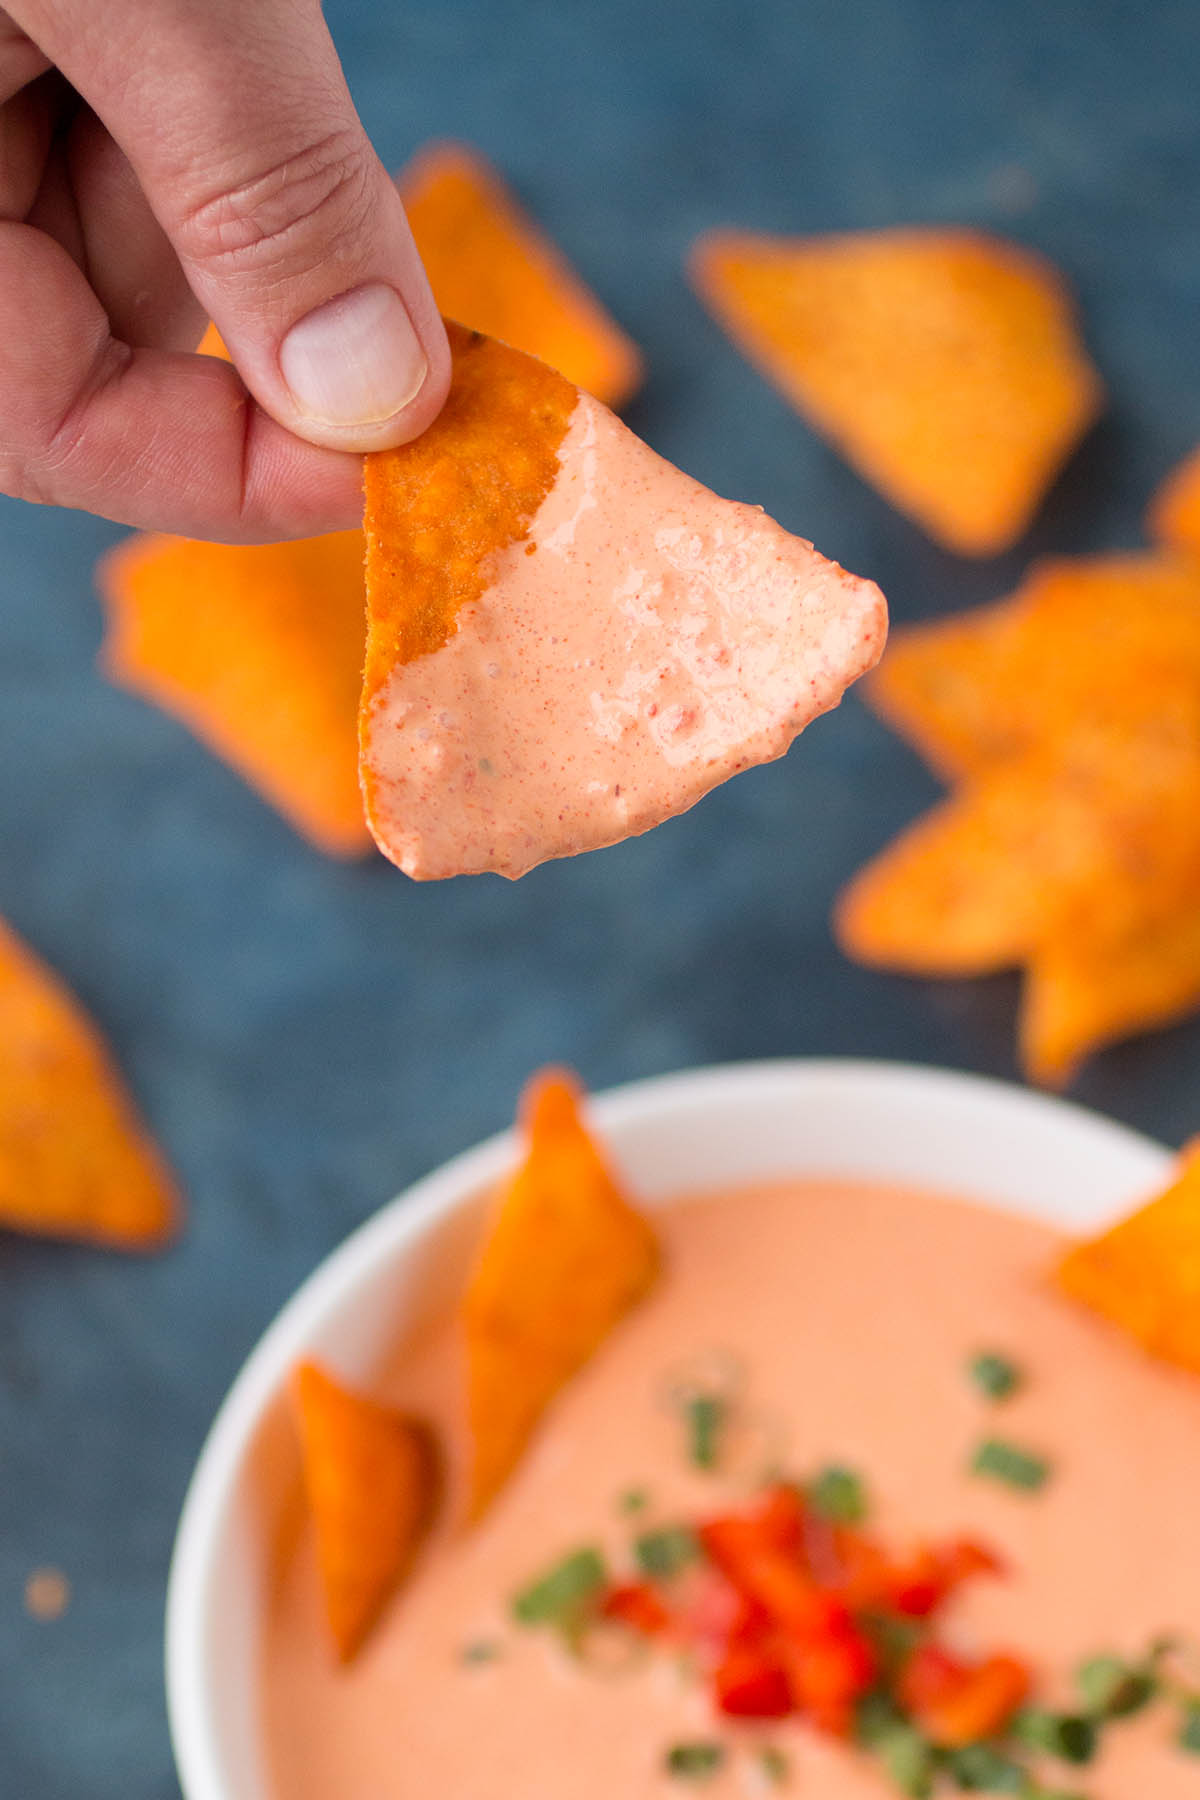 A chip dipped into the Spicy Cajun Dip.